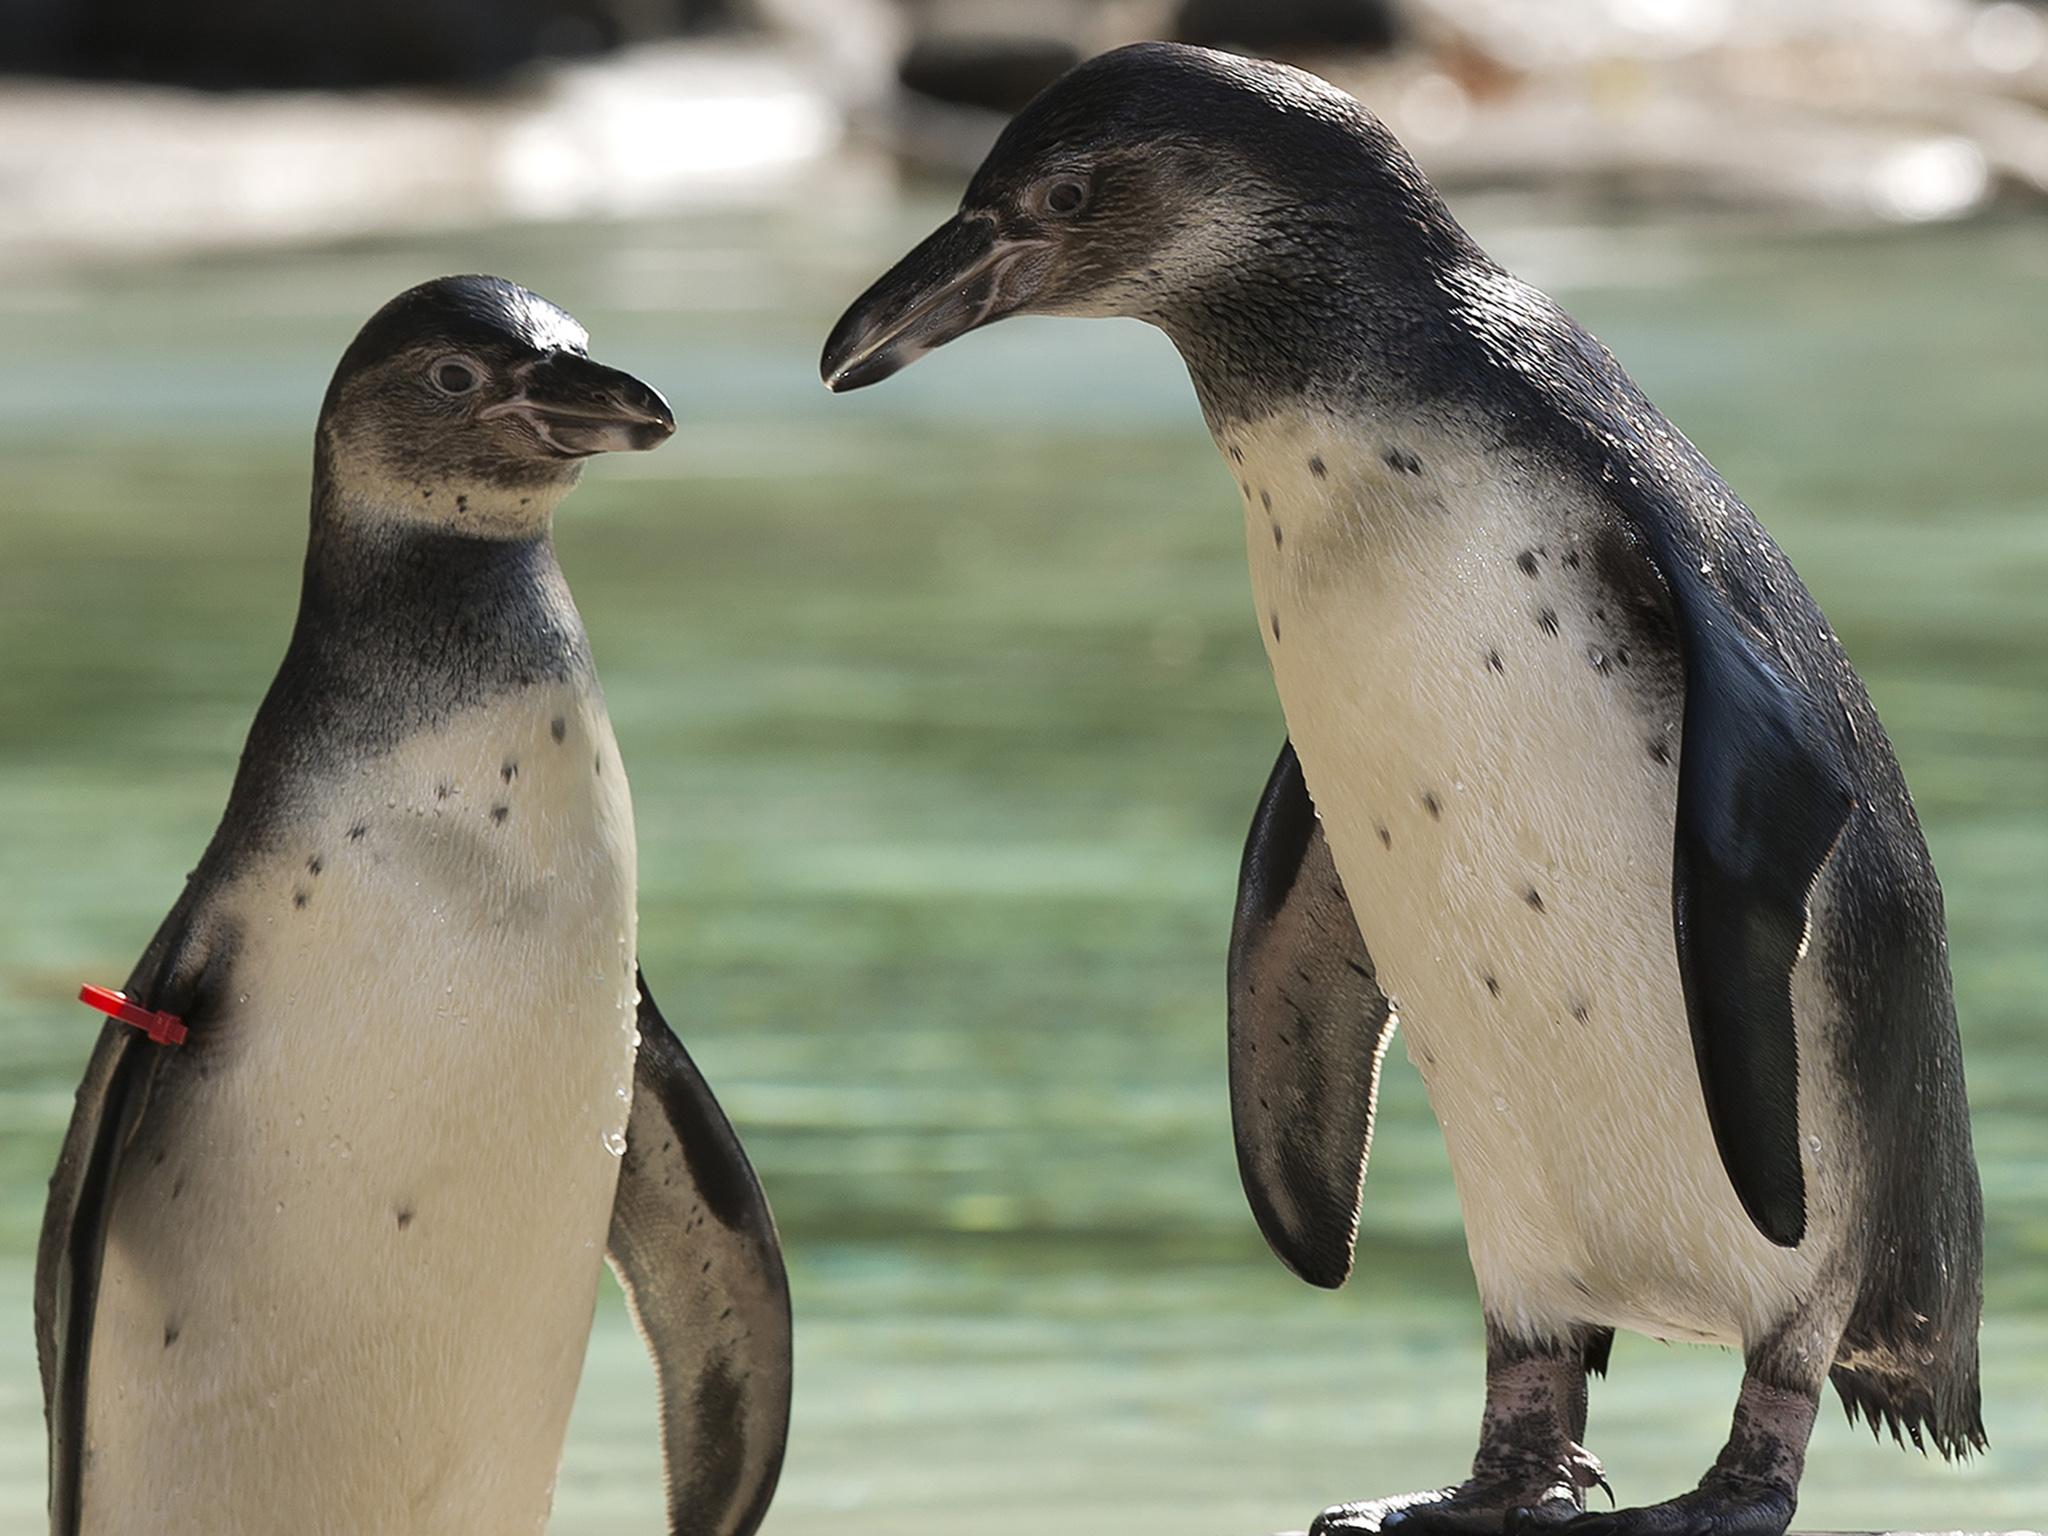 The Humboldt penguins may have been scared in their pen by a loud noise or shout (file photo)